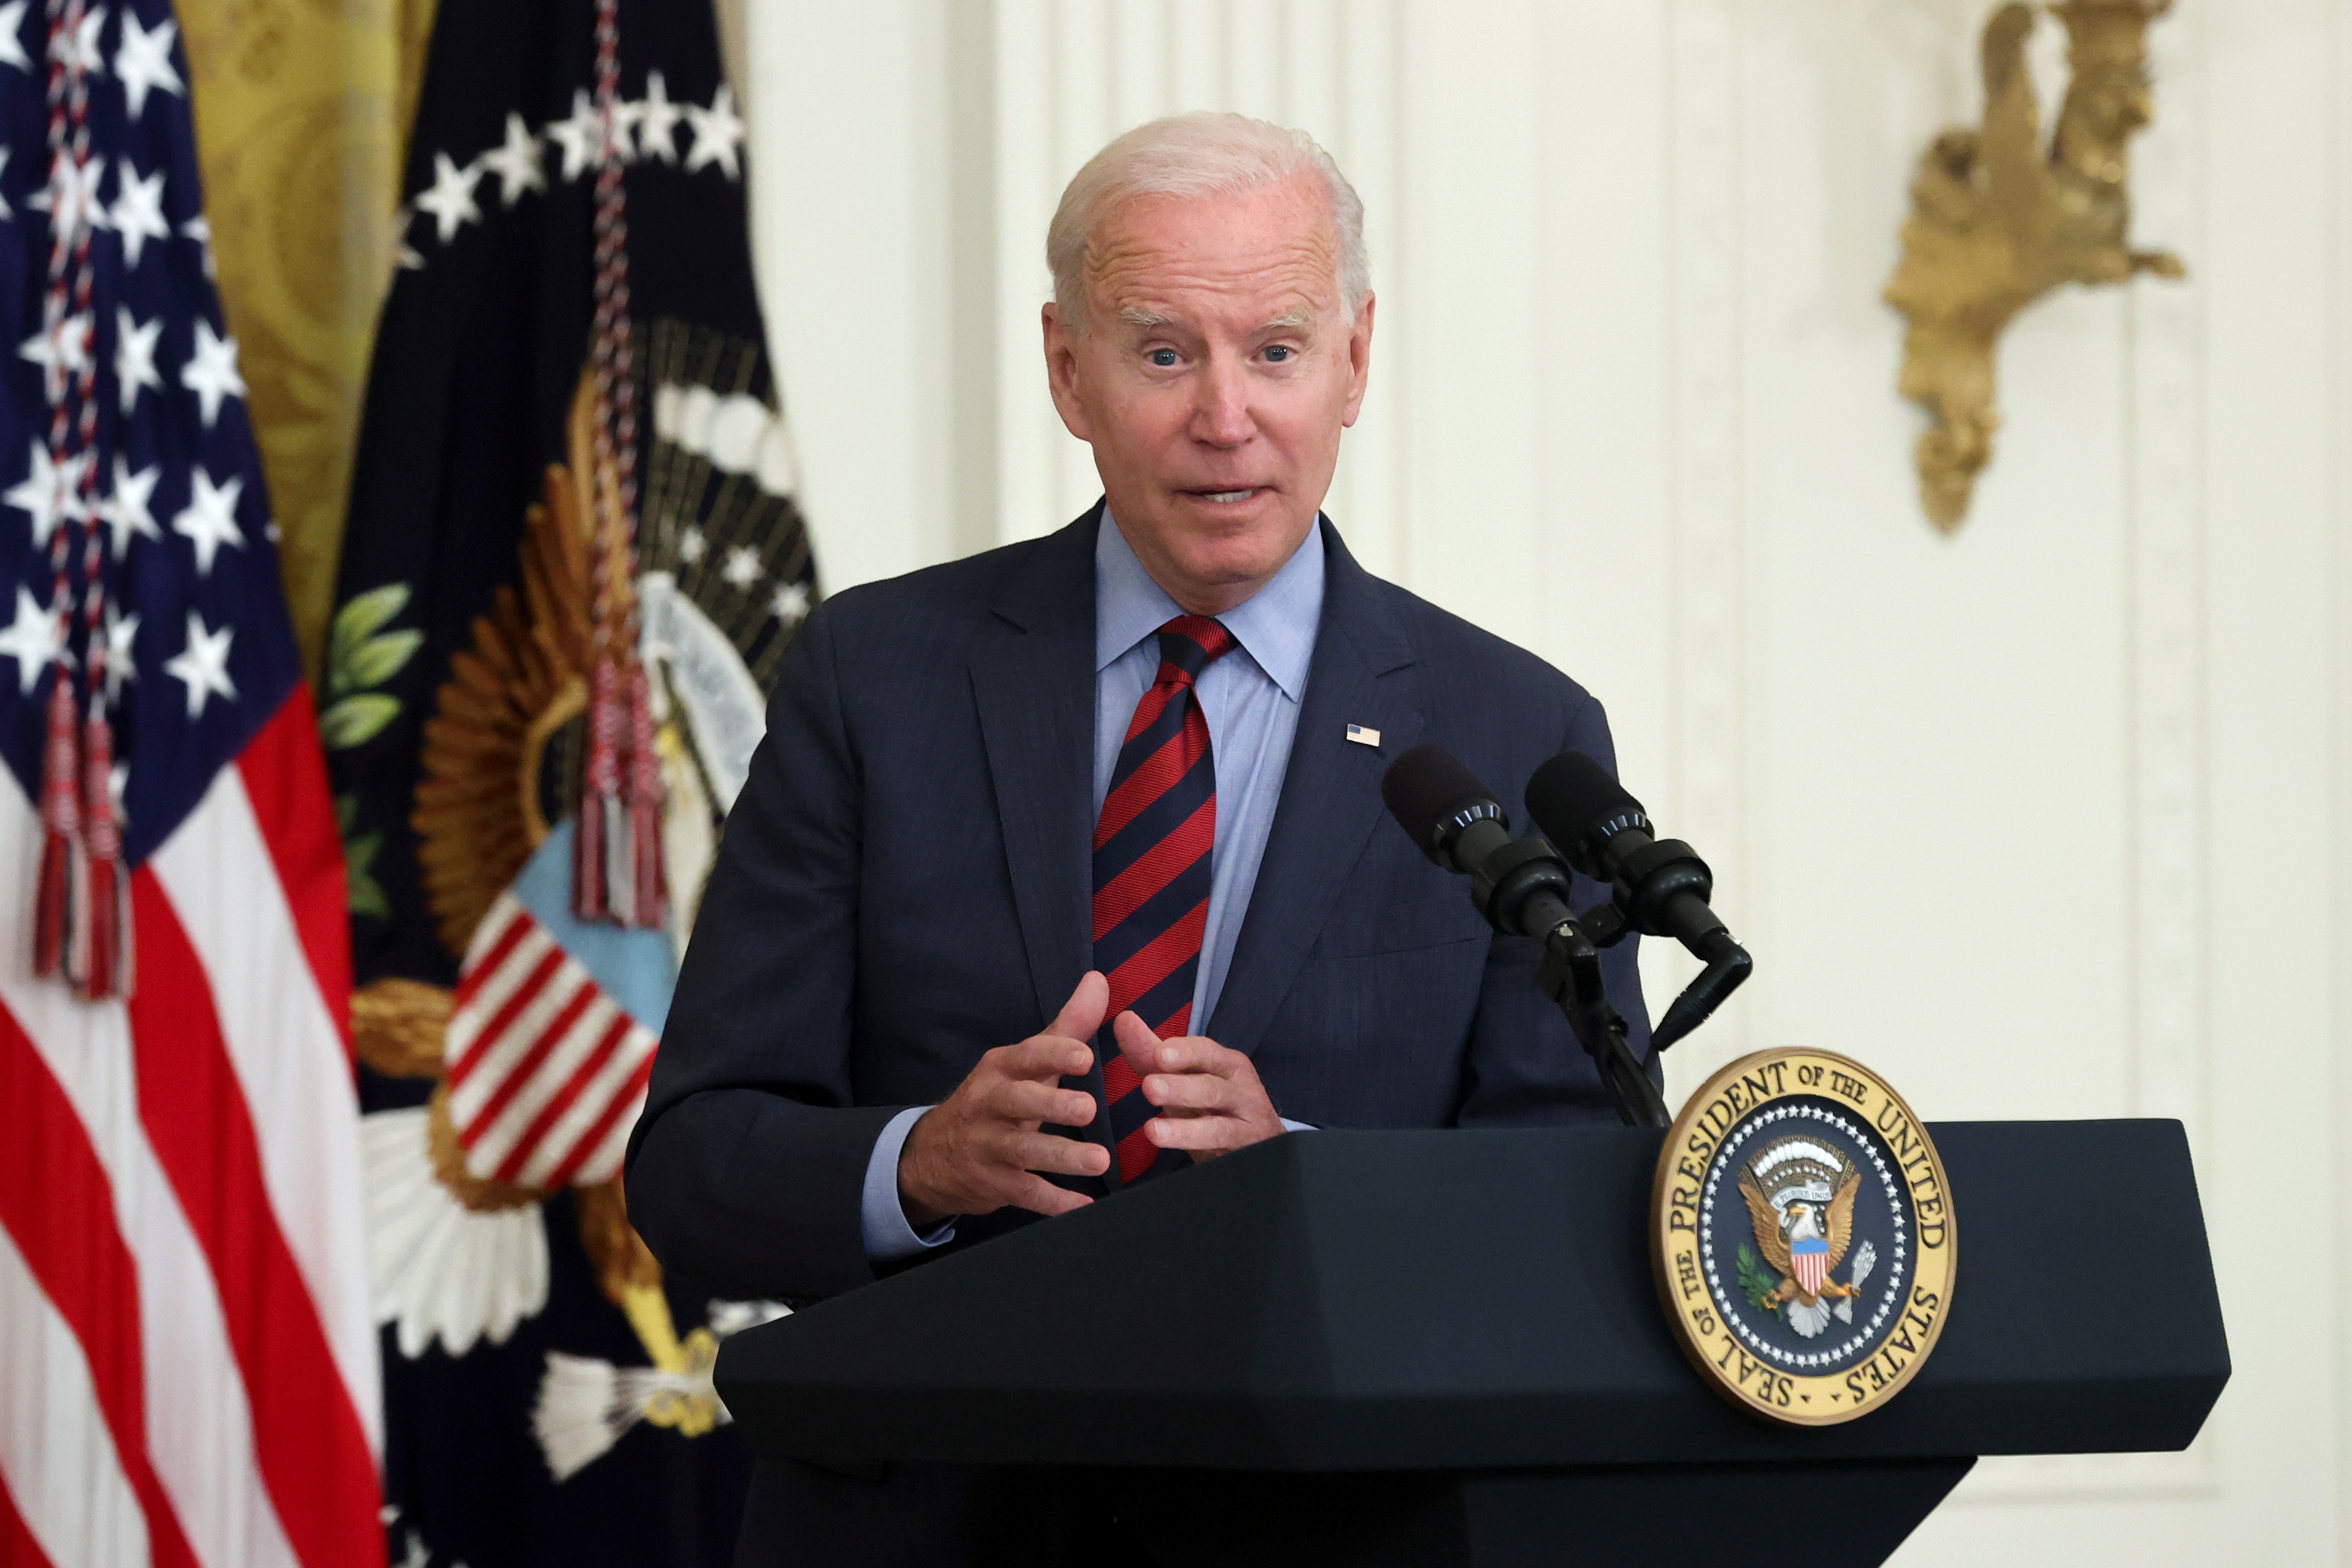 U.S. President Biden delivers remarks at the White House in Washington